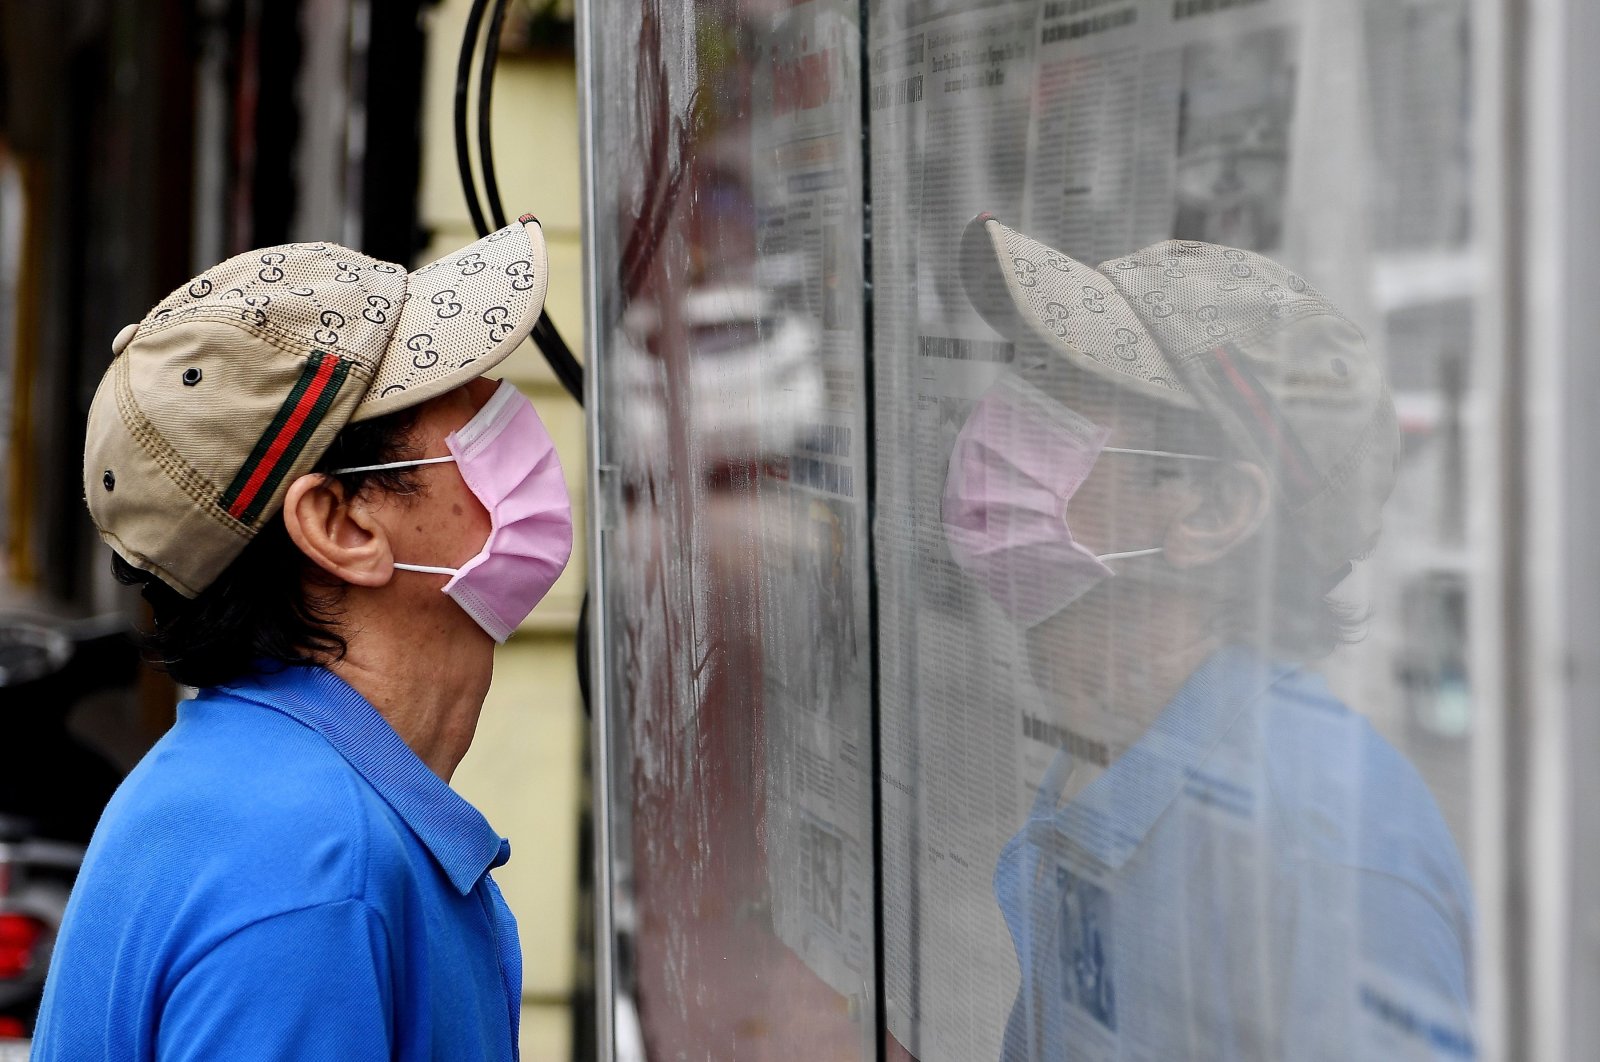 A man wearing a face mask reads the local daily newspaper "Hanoi Moi" displayed in a case on a street amid Vietnam's nationwide social isolation effort as a preventive measure against the spread of the COVID-19 coronavirus in Hanoi on April 21, 2020. (AFP Photo)